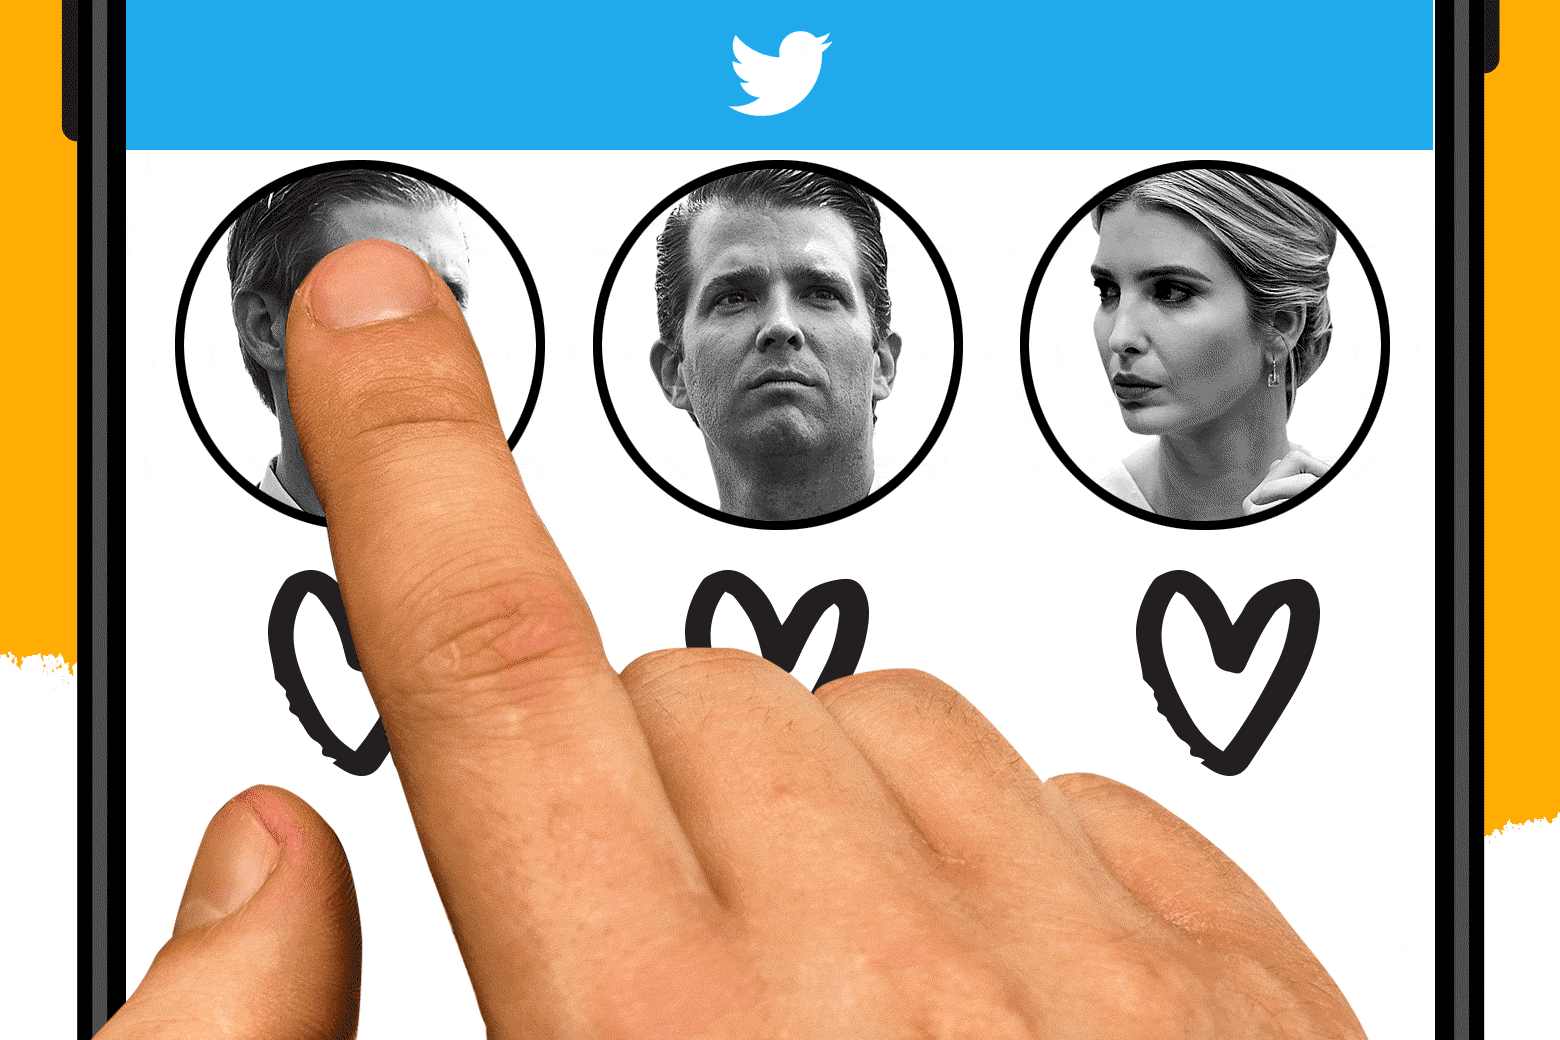 GIF of Don Jr., Eric, and Ivanka Trump in a social media window with a distracted finger alternating liking them.